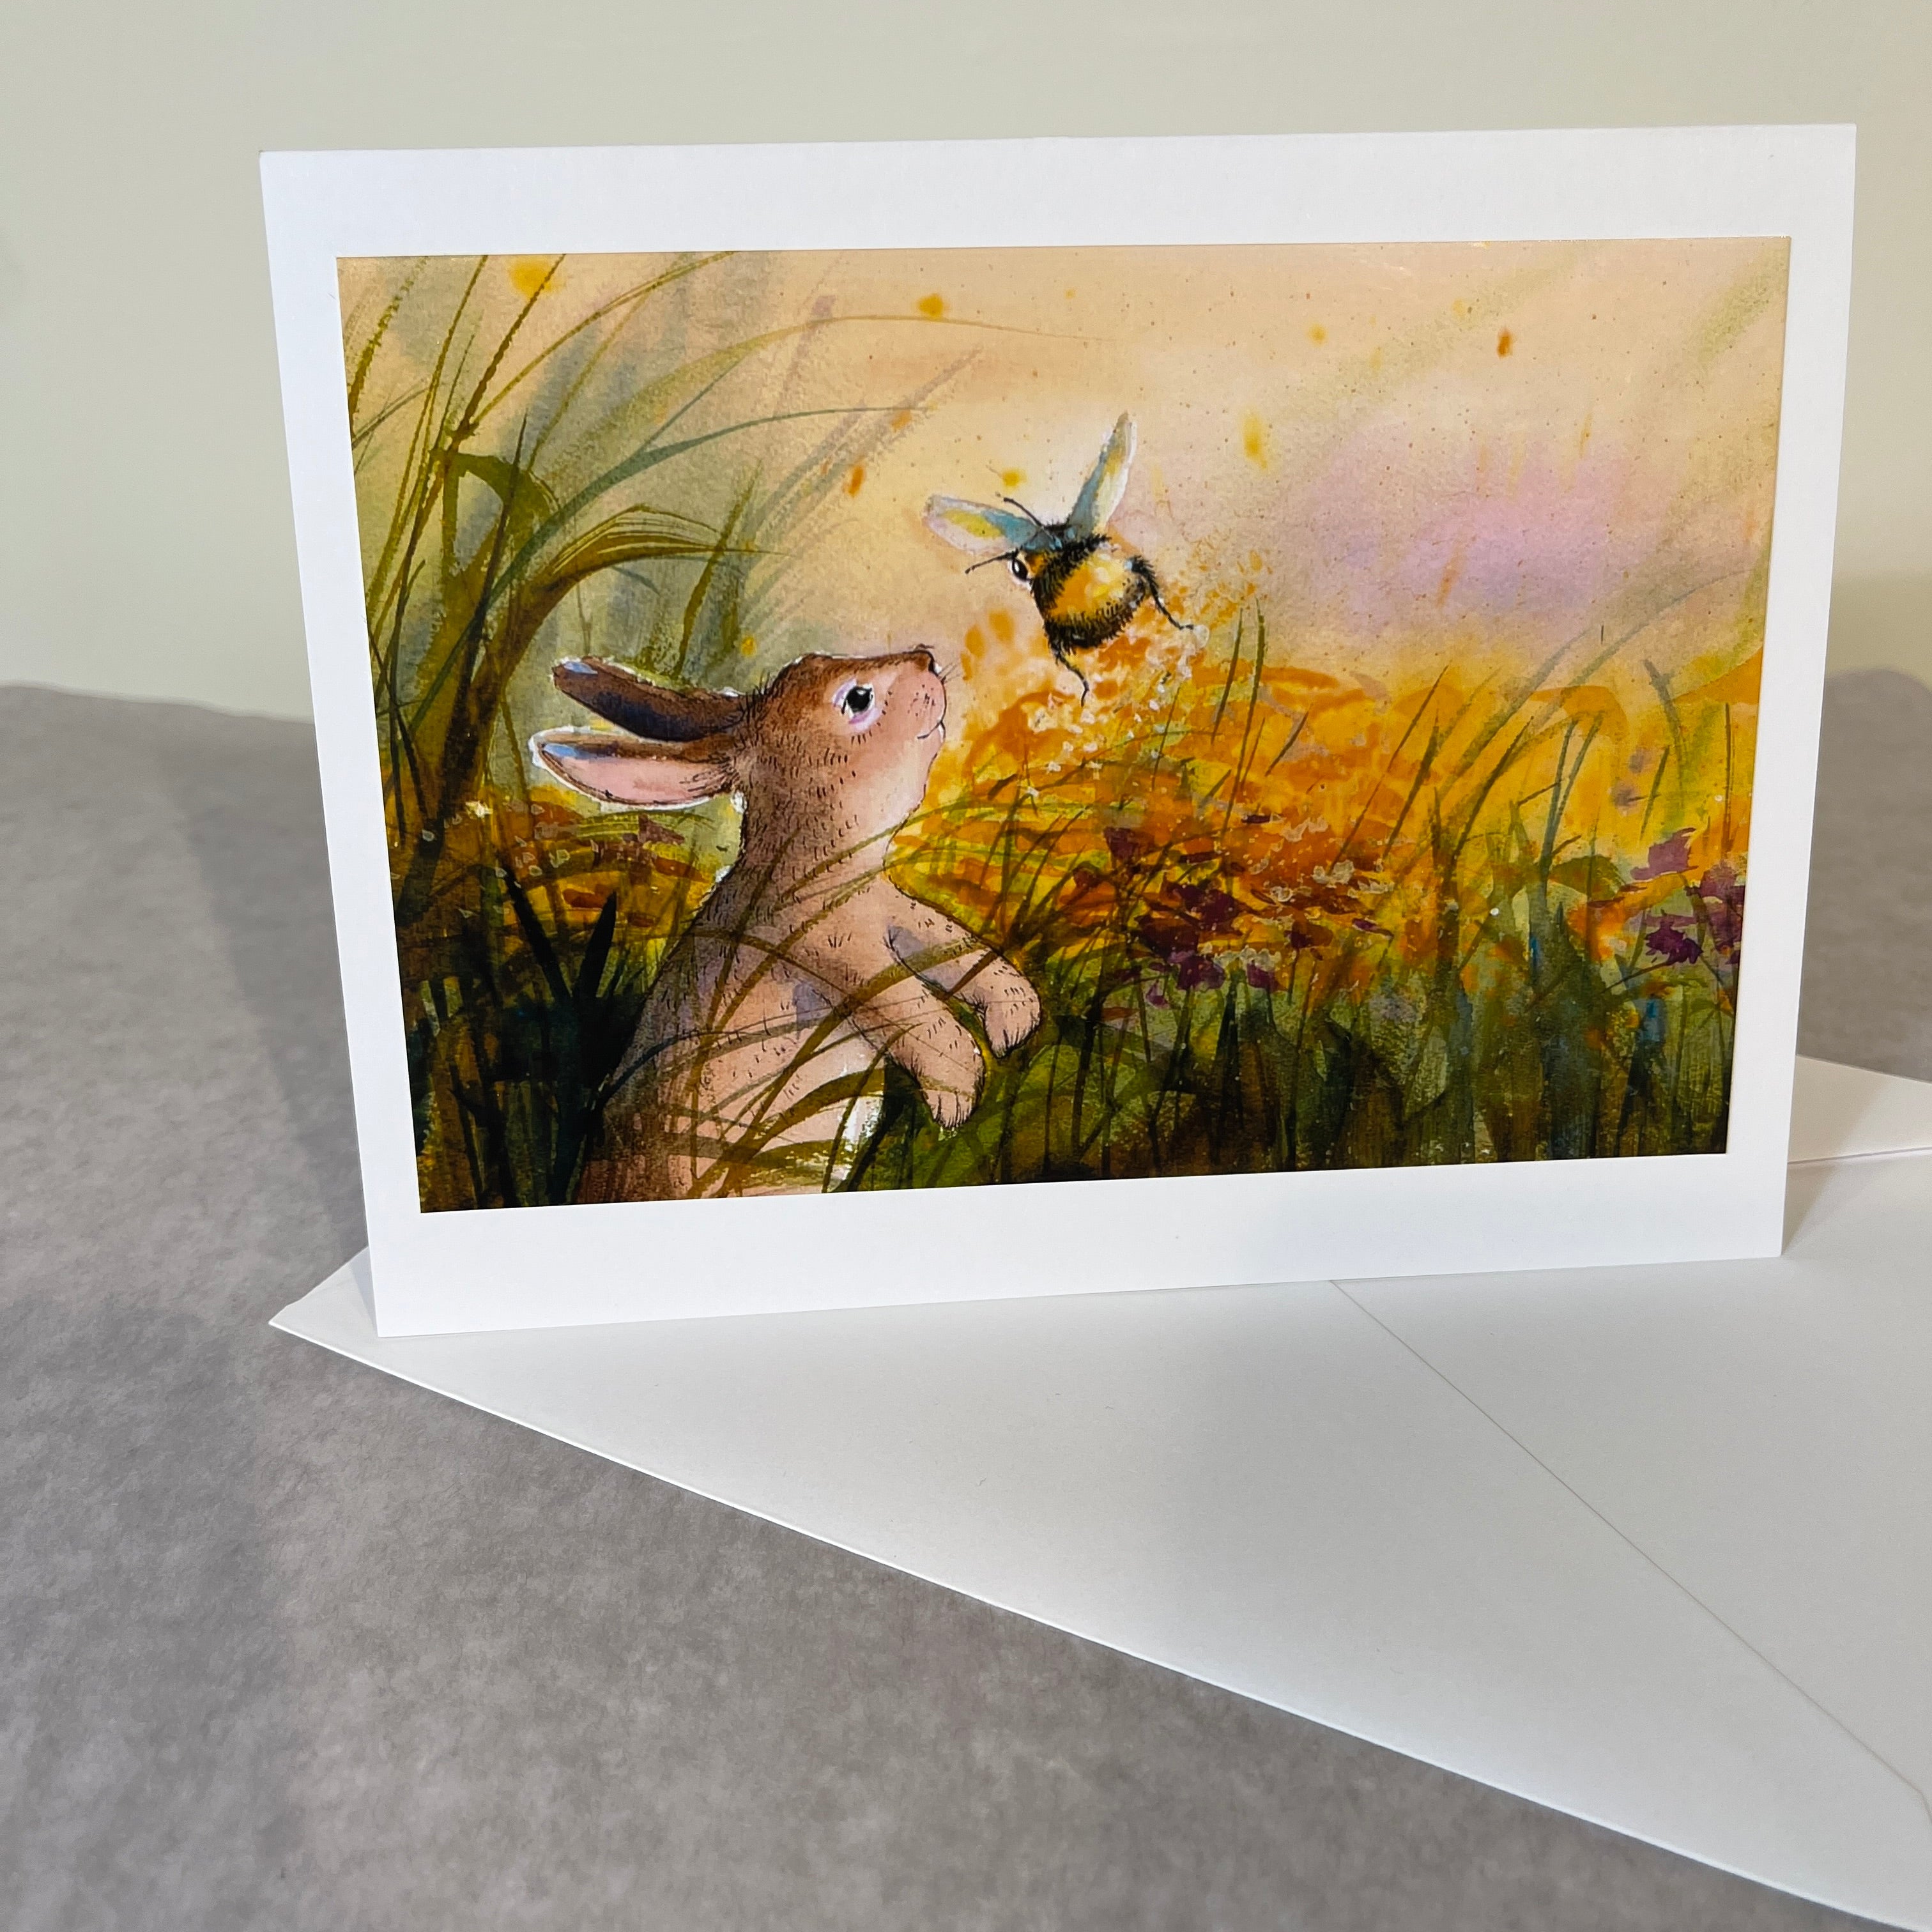 rabbit meets bumble bee photo note card illustration by Laura Winslow from Hop Onward Rabbit Rabbit